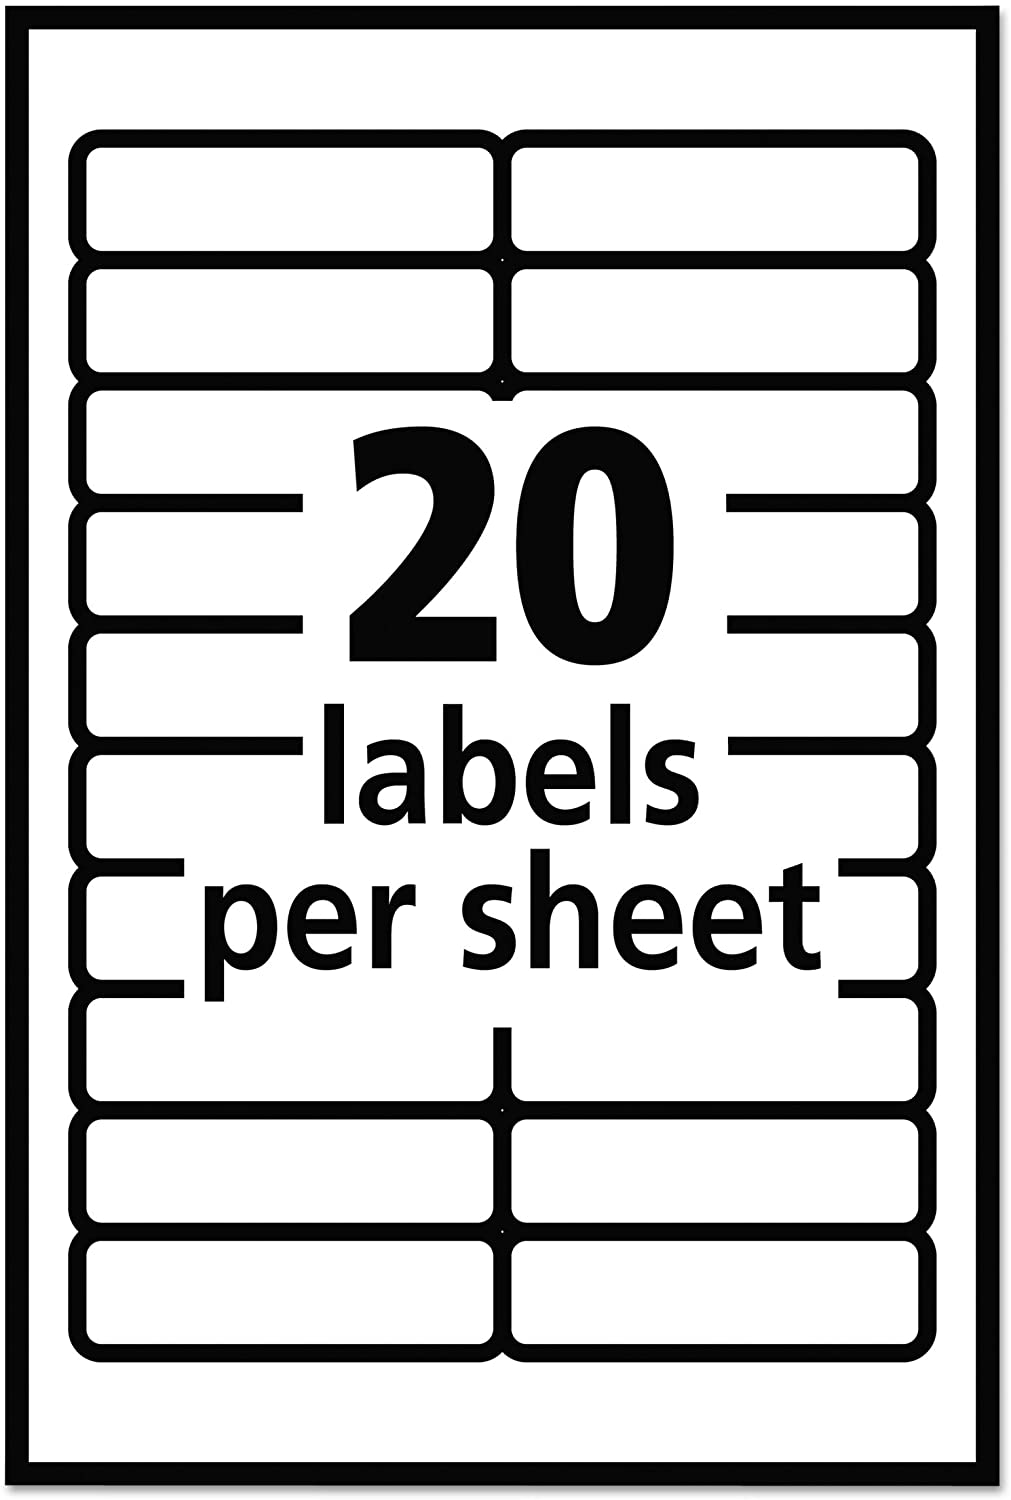 White Self-adhesive Removable Labels